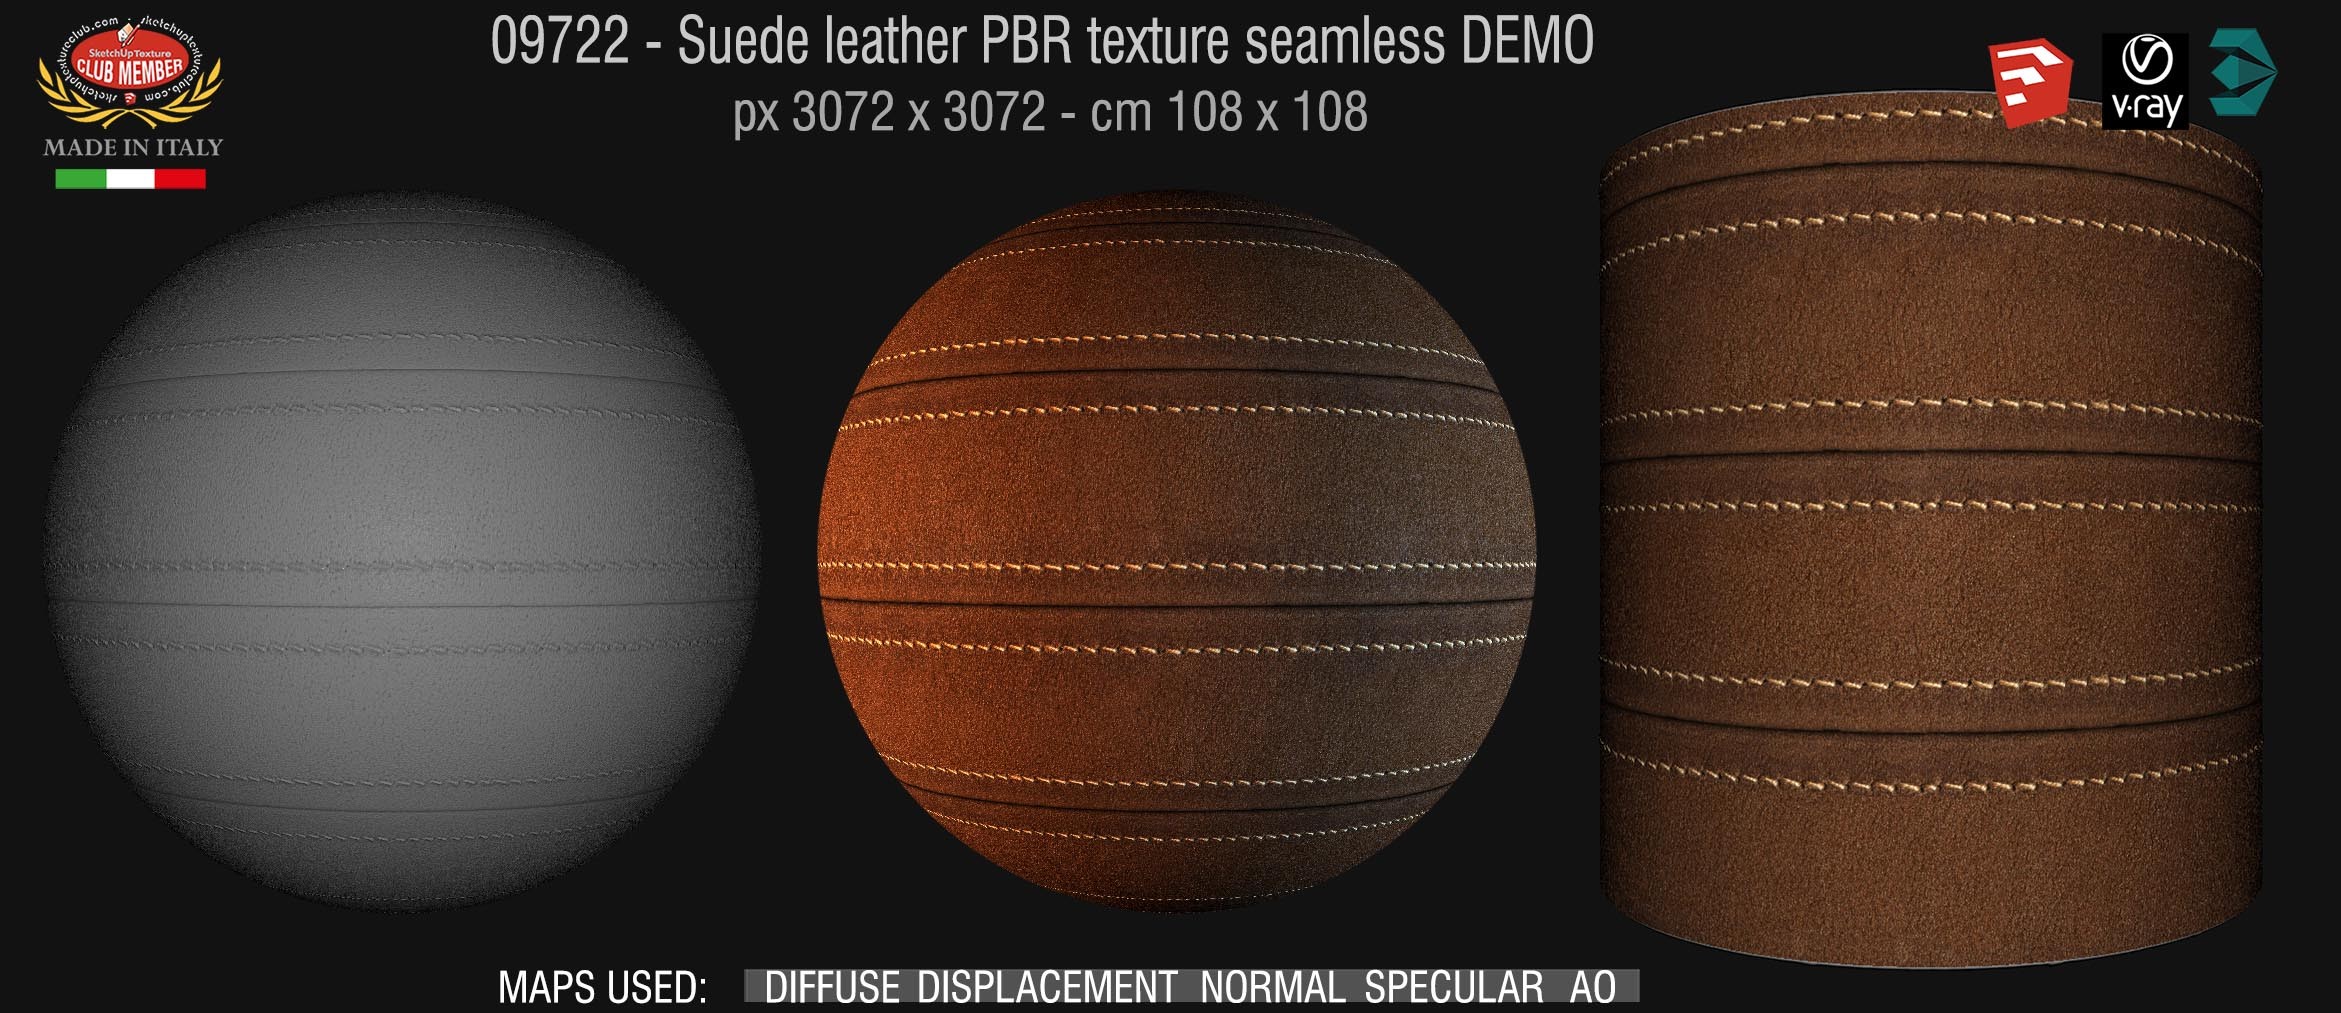 09722 Suede leather PBR texture seamless DEMO